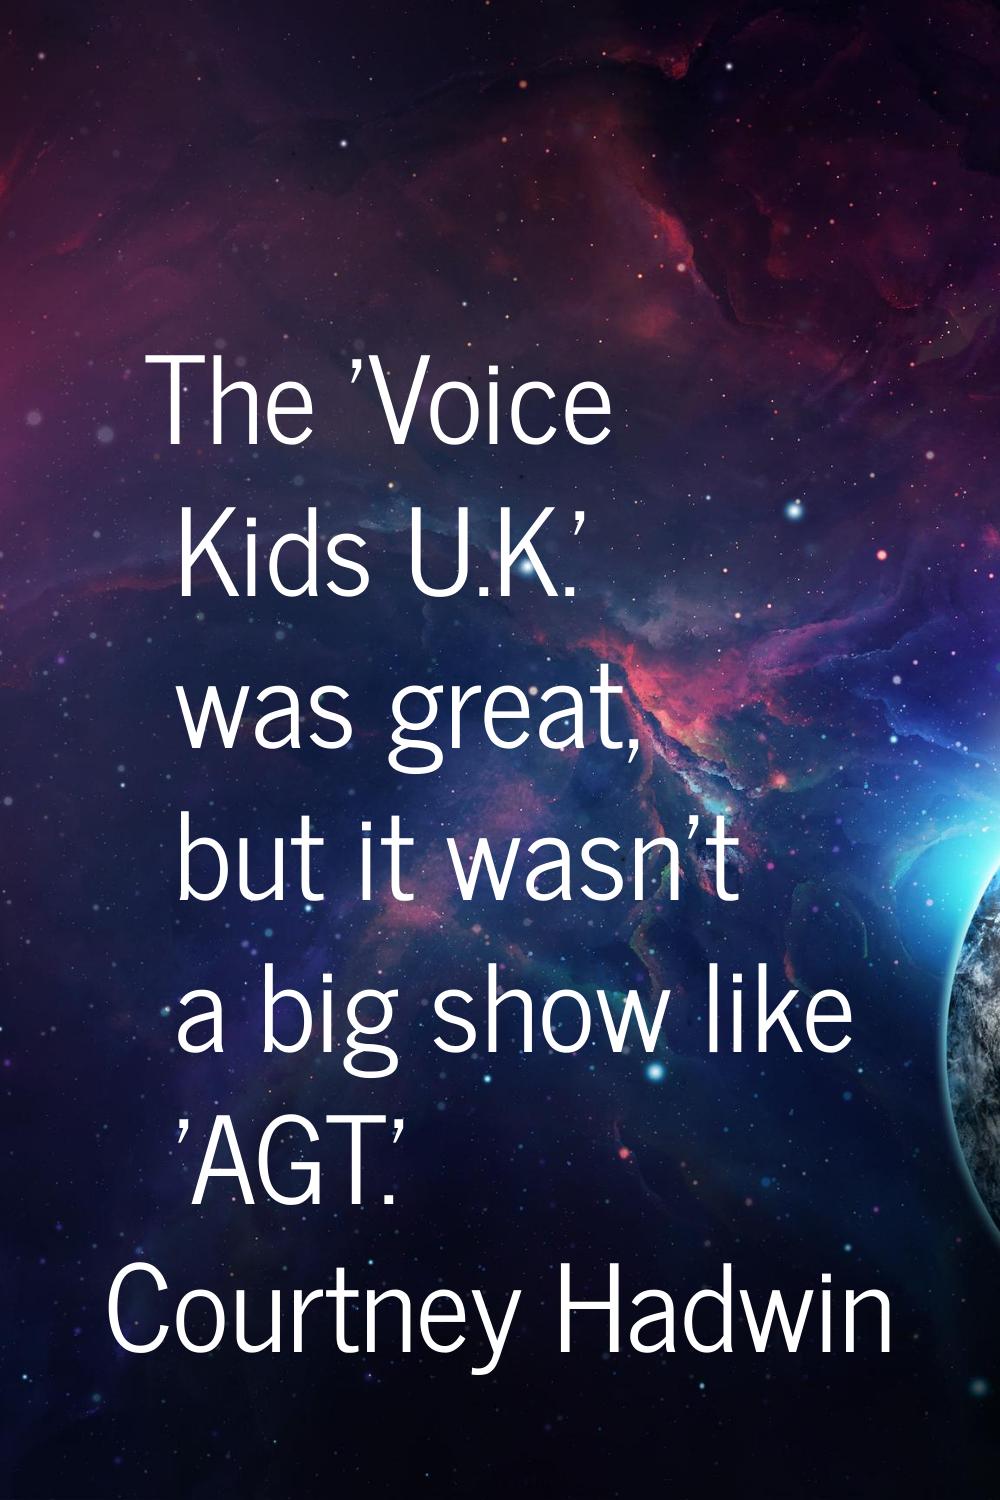 The 'Voice Kids U.K.' was great, but it wasn't a big show like 'AGT.'